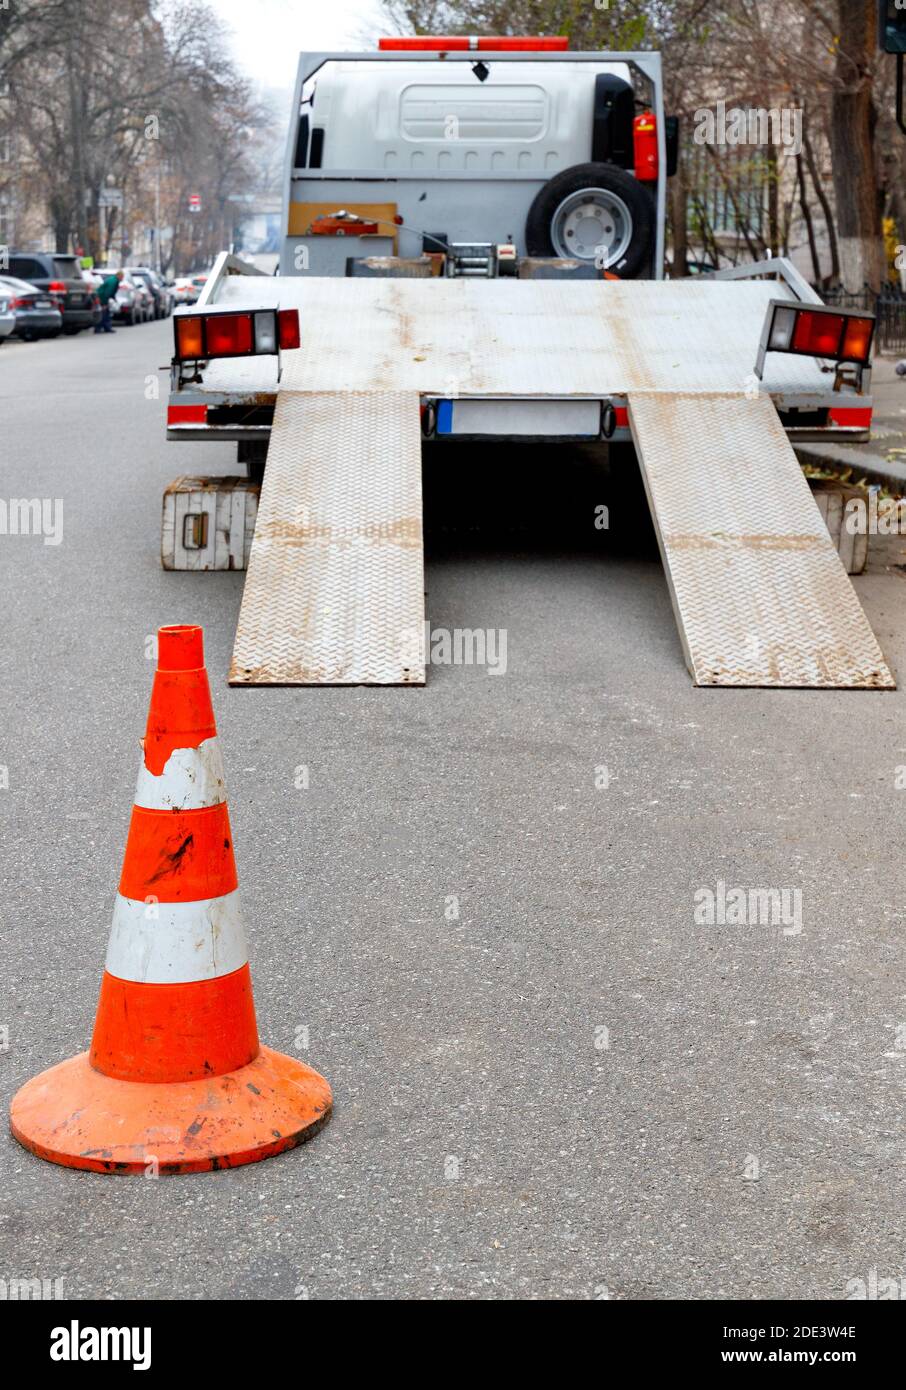 A bright orange traffic cone stands on the dark asphalt and fences the roadway with a parked transport truck, vertical image, copy space. Stock Photo